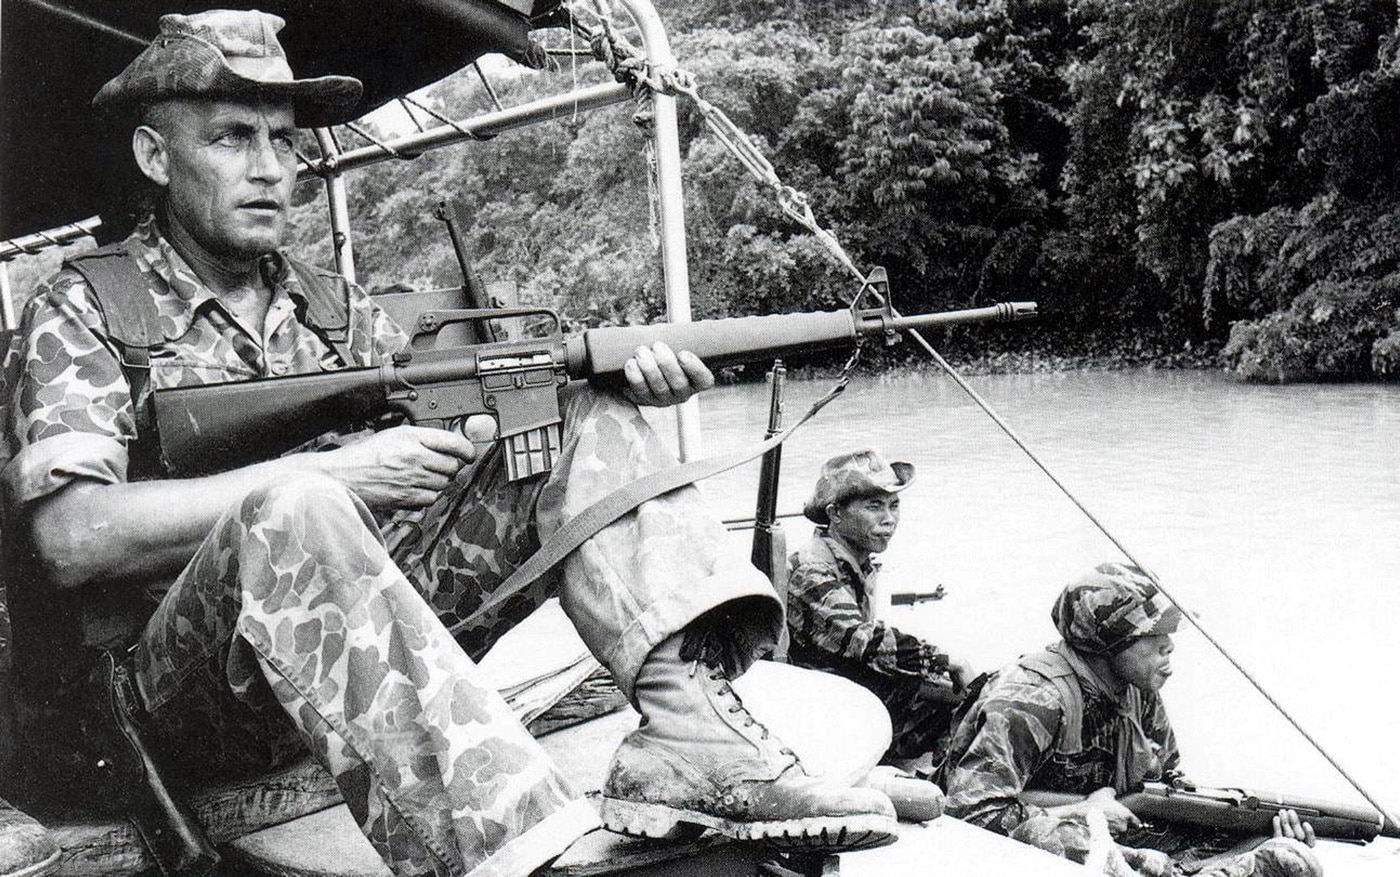 A U.S. Army advisor armed with an AR15 Model 602 rifle carbine.  Note the absence of a forward assist device and that the ARVN soldiers he is embedded with are armed with M1 Garand rifles. Tiger stripe camo and jungle camo us soldiers.